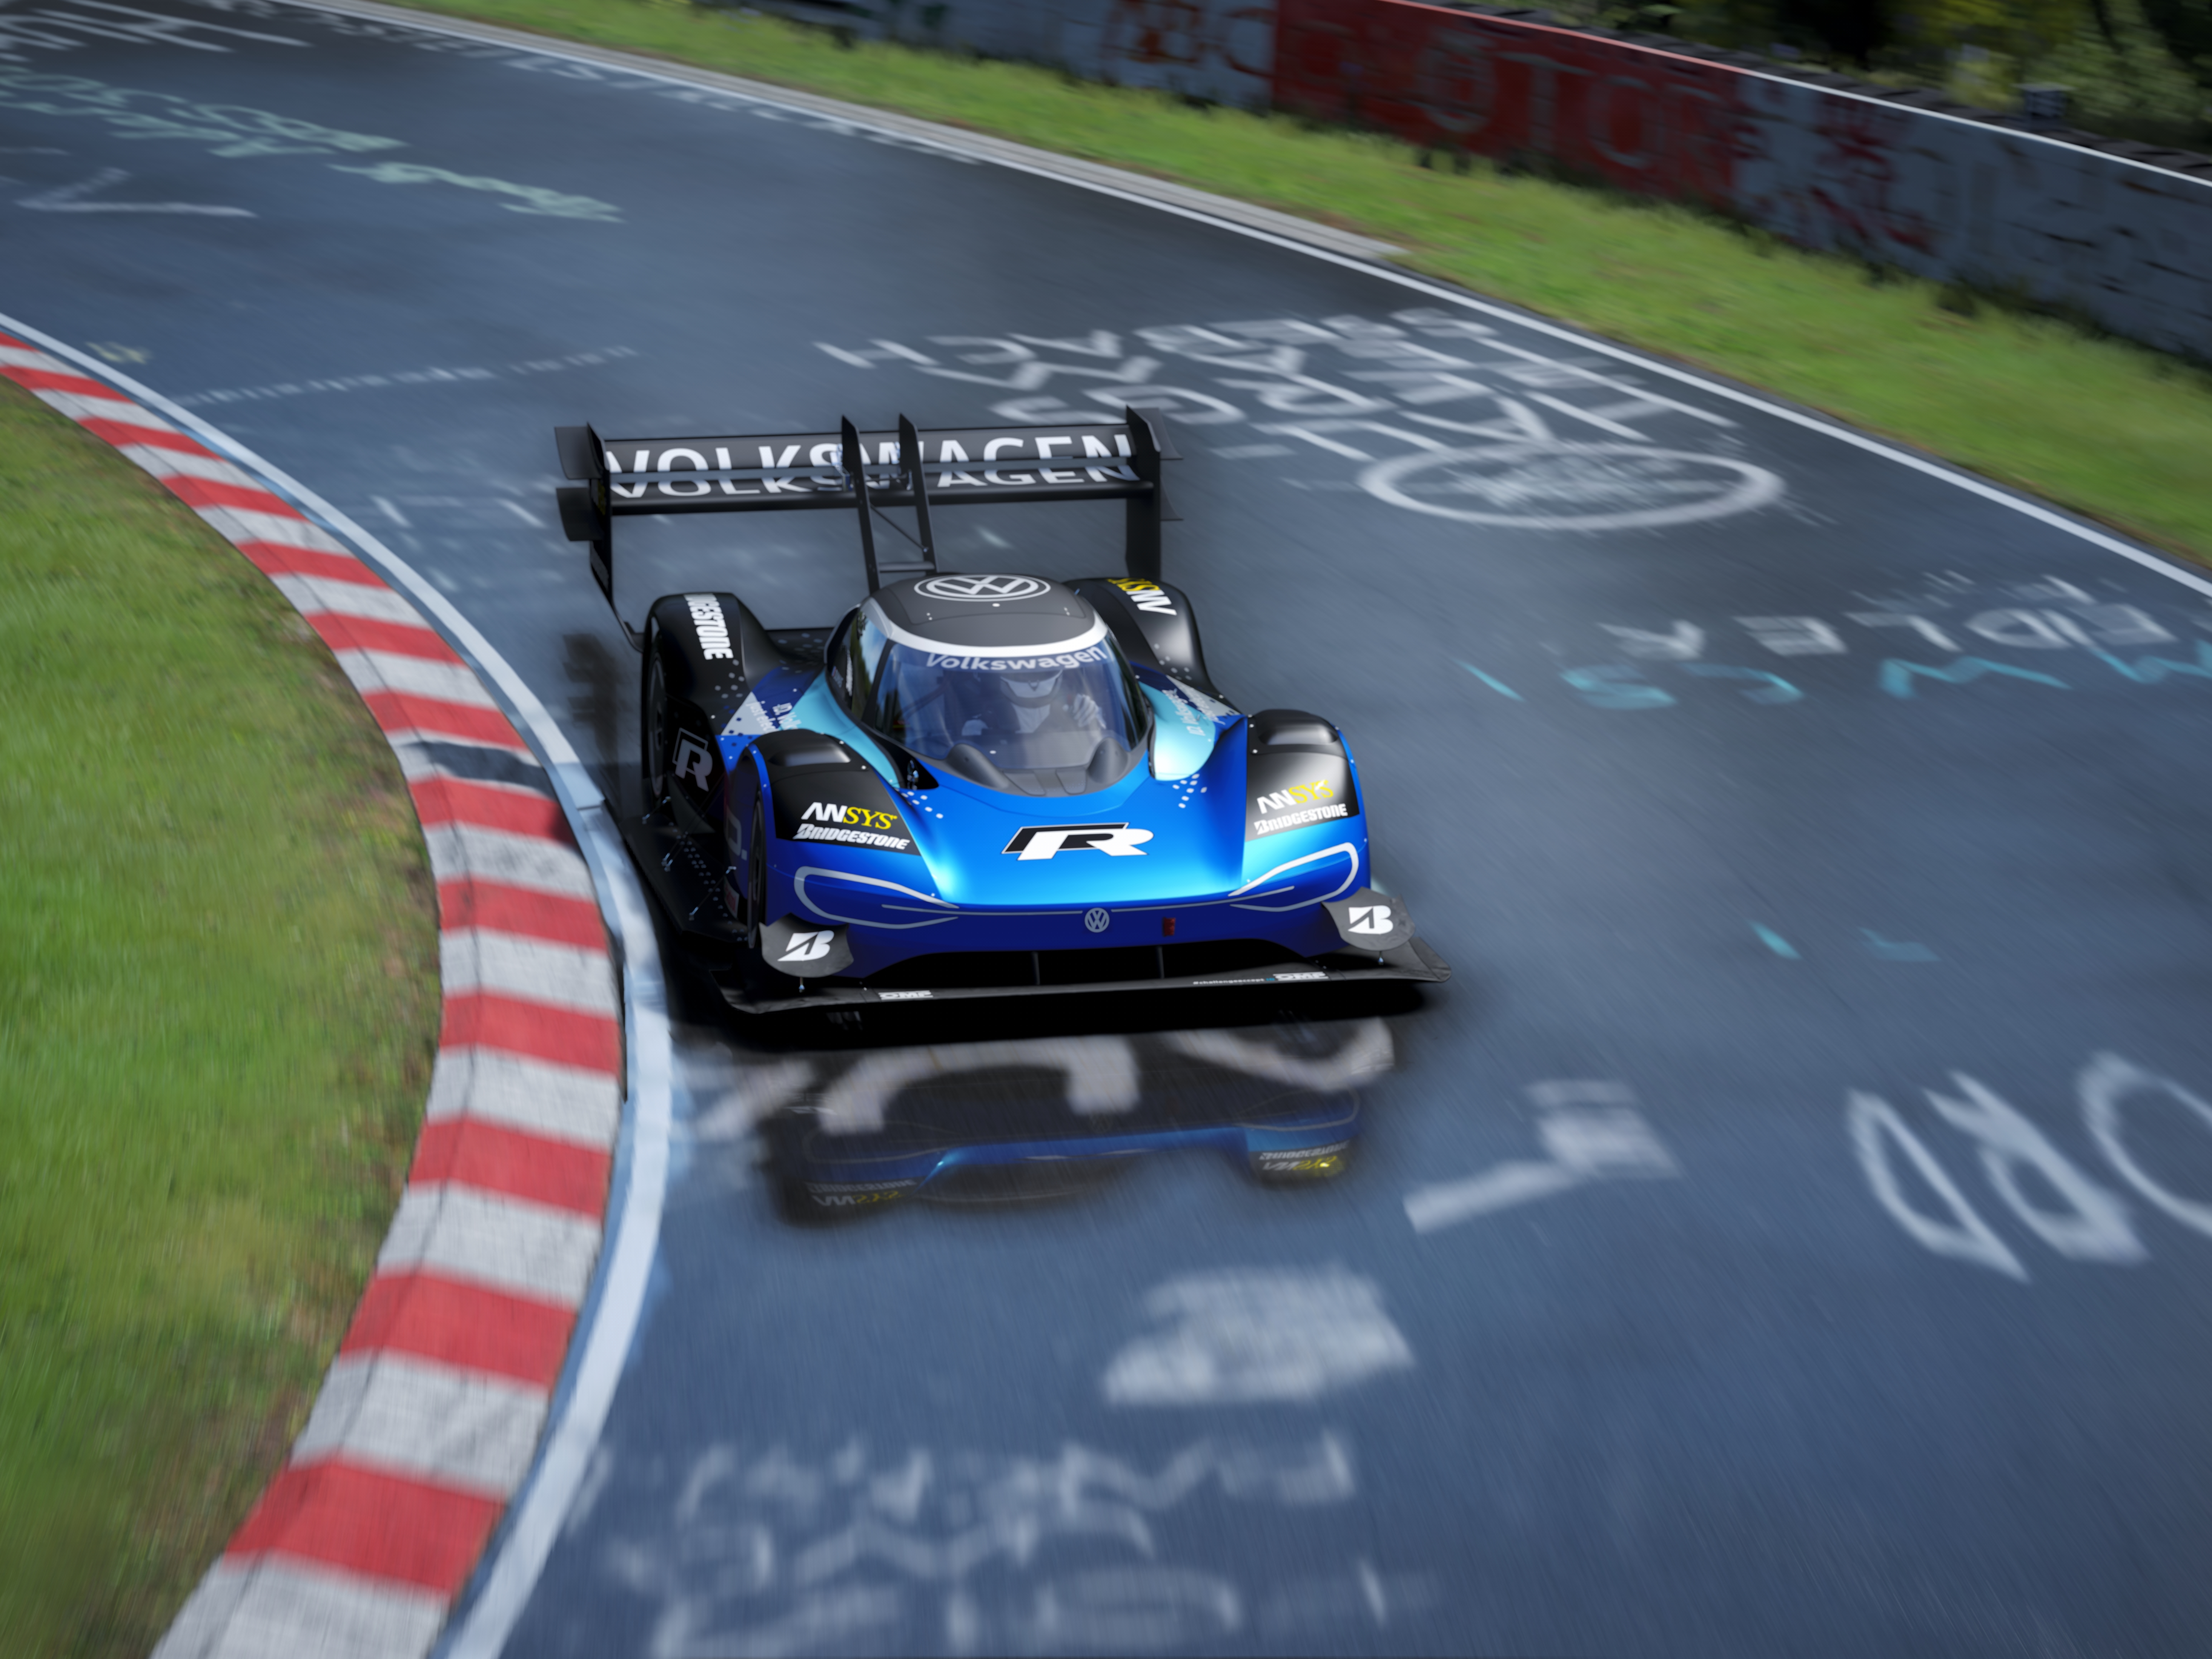 Nurburgring Volkswagen Volkswagen ID R Race Cars Assetto Corsa PC Gaming Wetland Sunny After Rain Fr 5760x4320